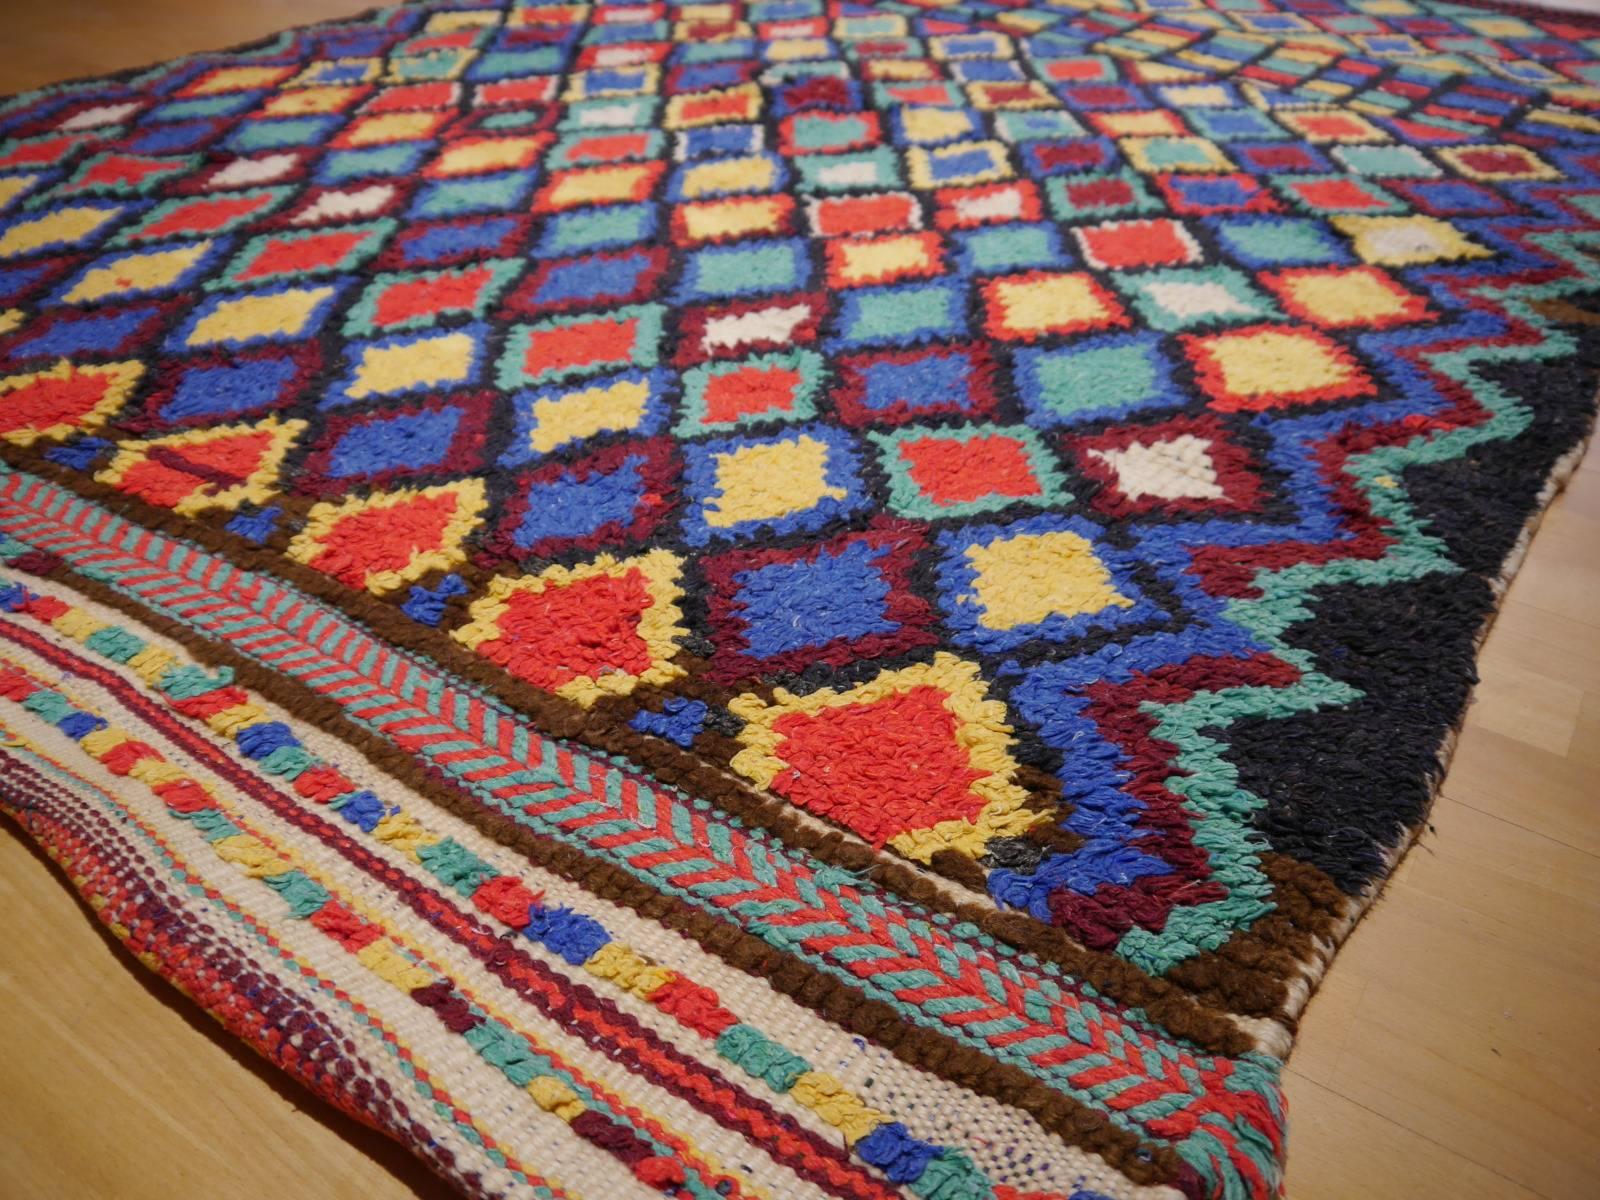 Beautiful bifurcated vintage Berber rug from the Atlas Mountains. Good full pile condition, all edges original. Great patina and vintage style. Hand-knotted by a tribal woman of the Azilal tribe.

Berber rugs and carpets are mainly made in Morocco,